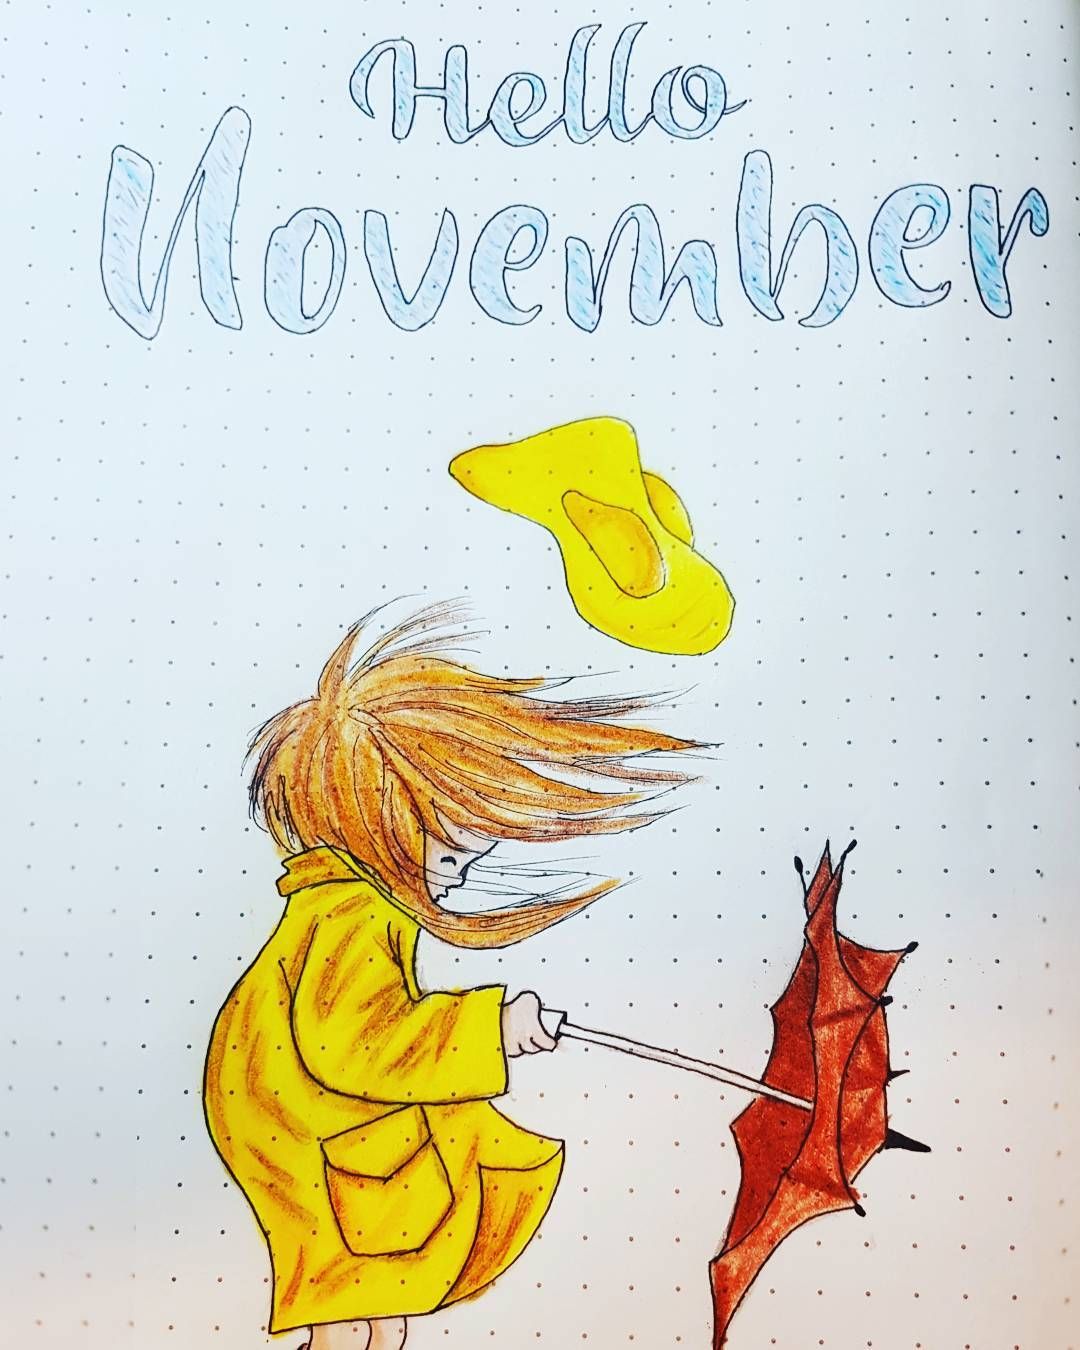 November Drawings at Explore collection of